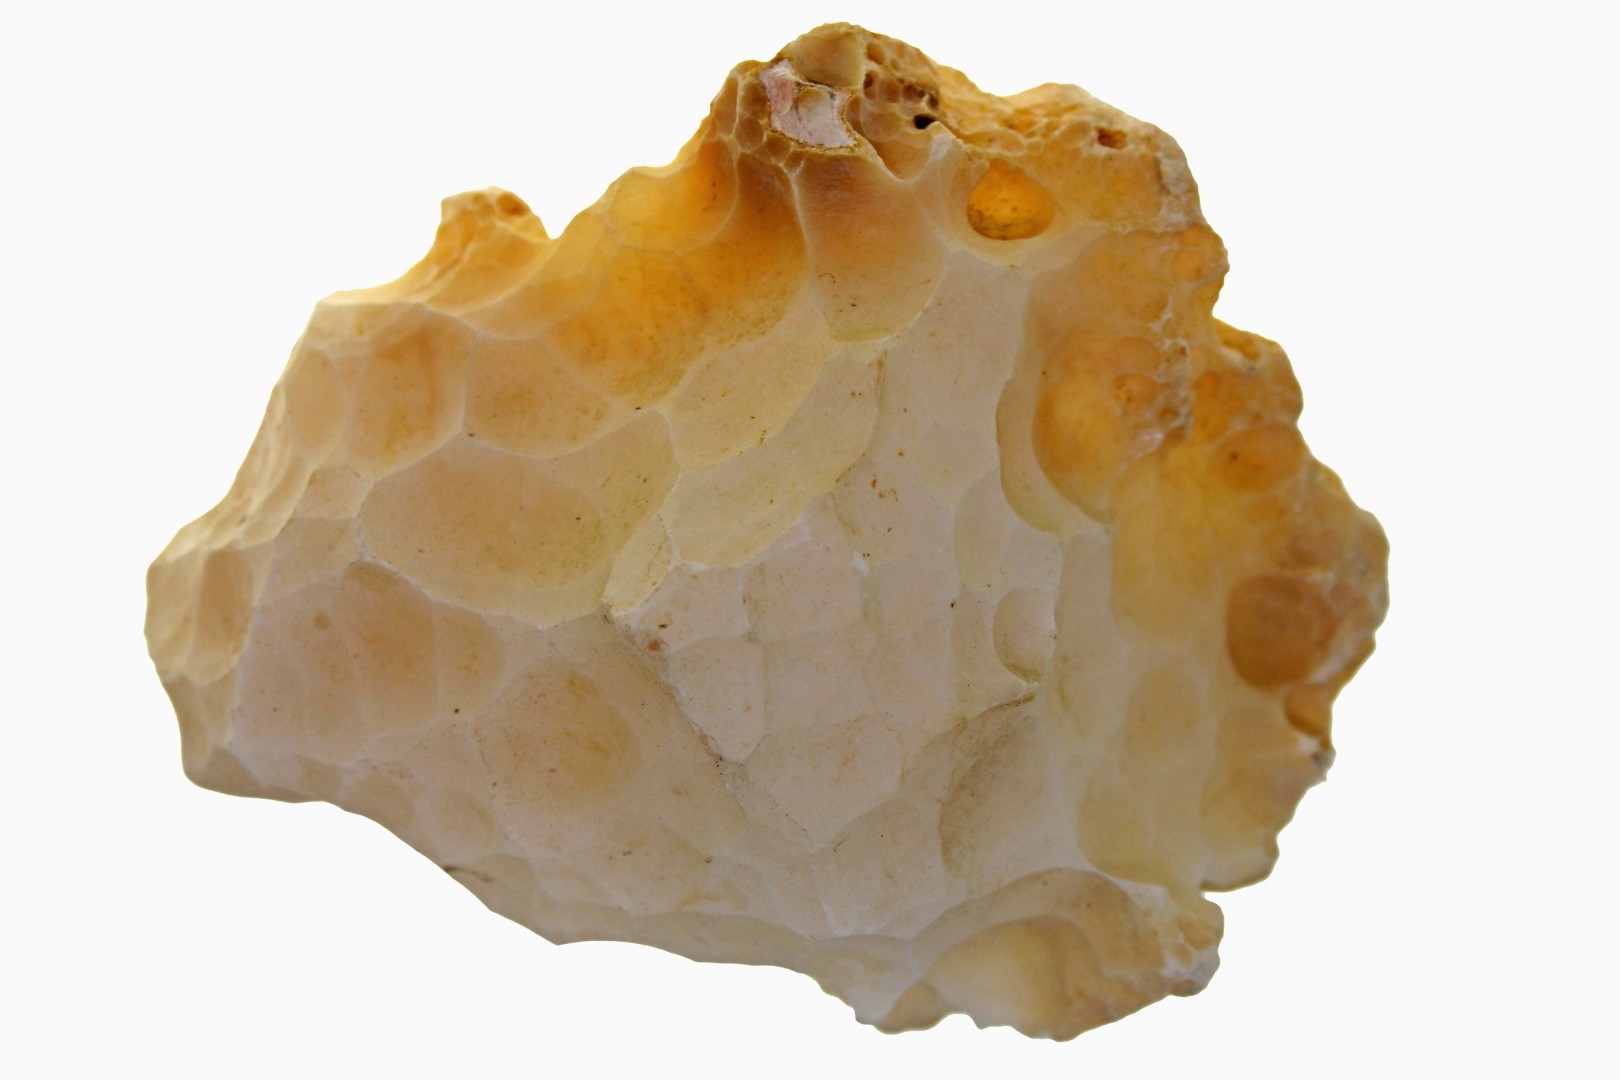 Agatized Coral (Agatized Coral)